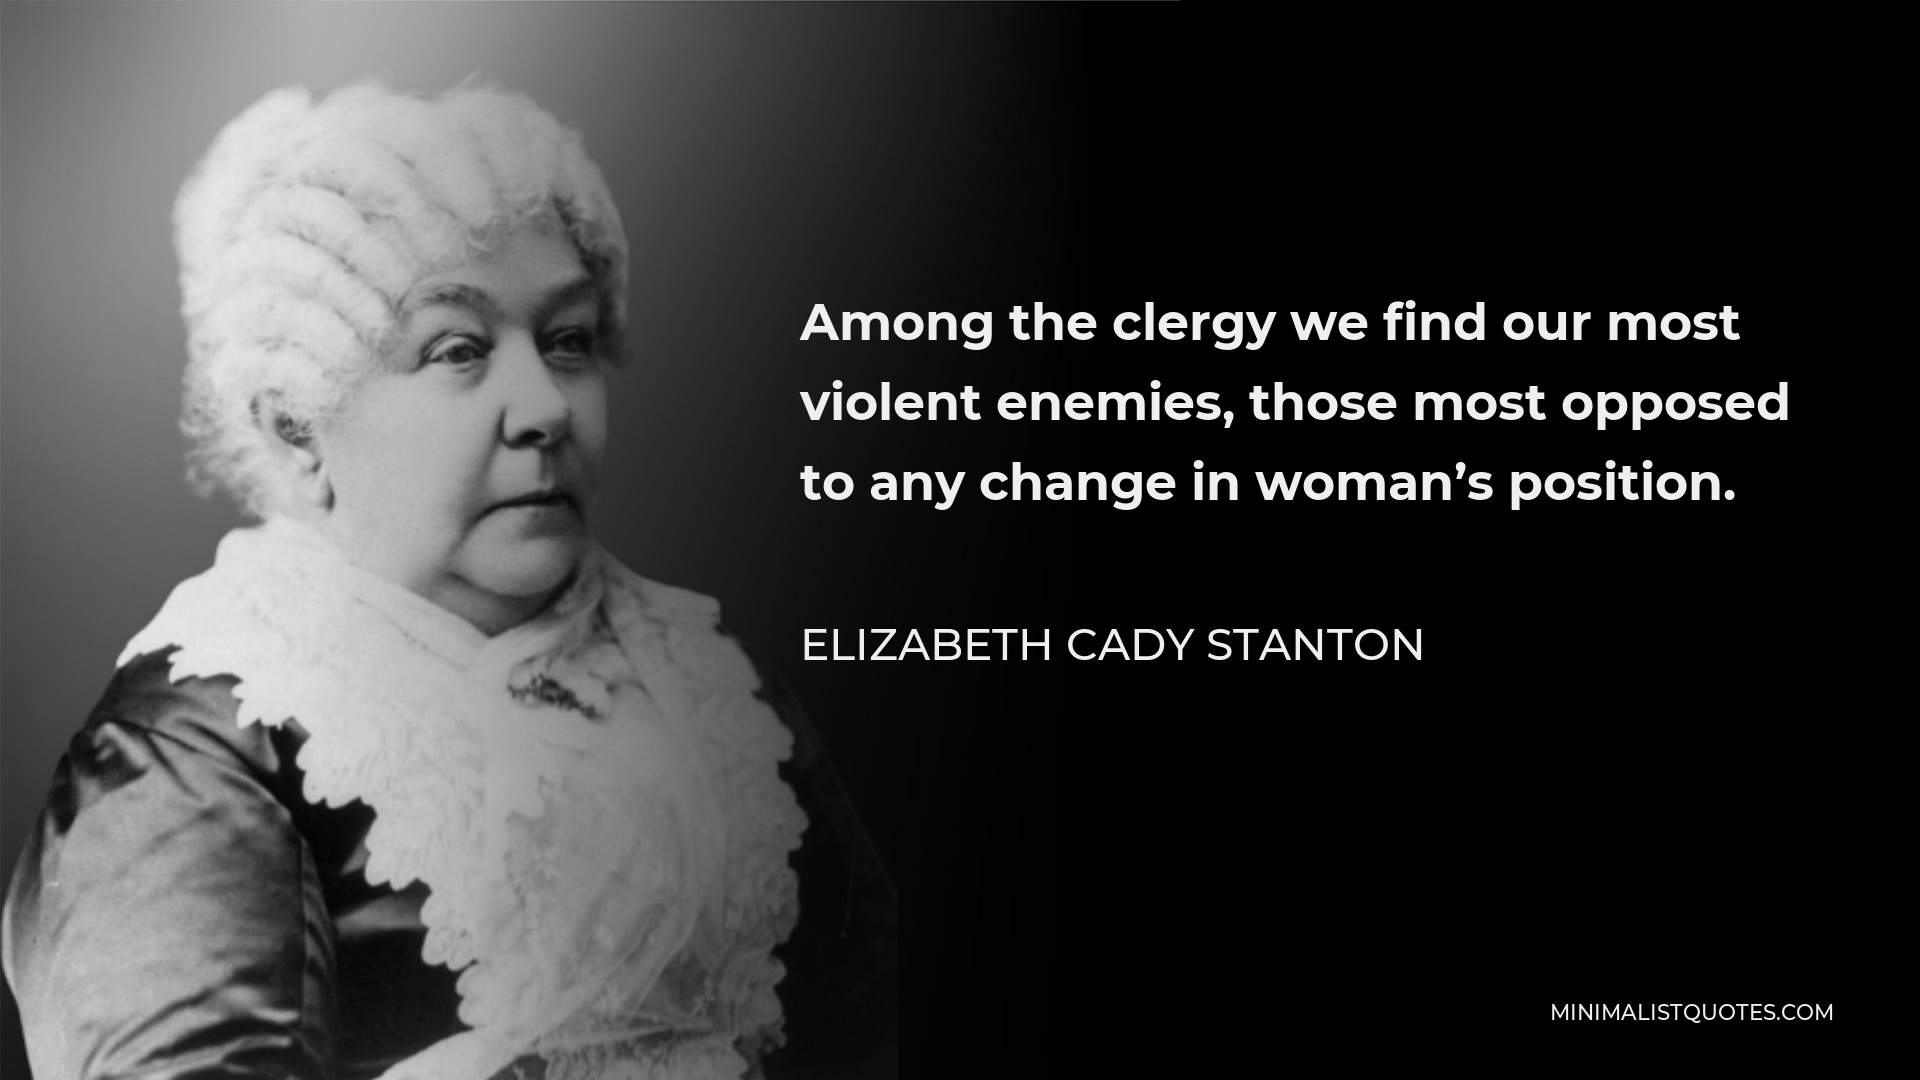 Elizabeth Cady Stanton Quote - Among the clergy we find our most violent enemies, those most opposed to any change in woman’s position.